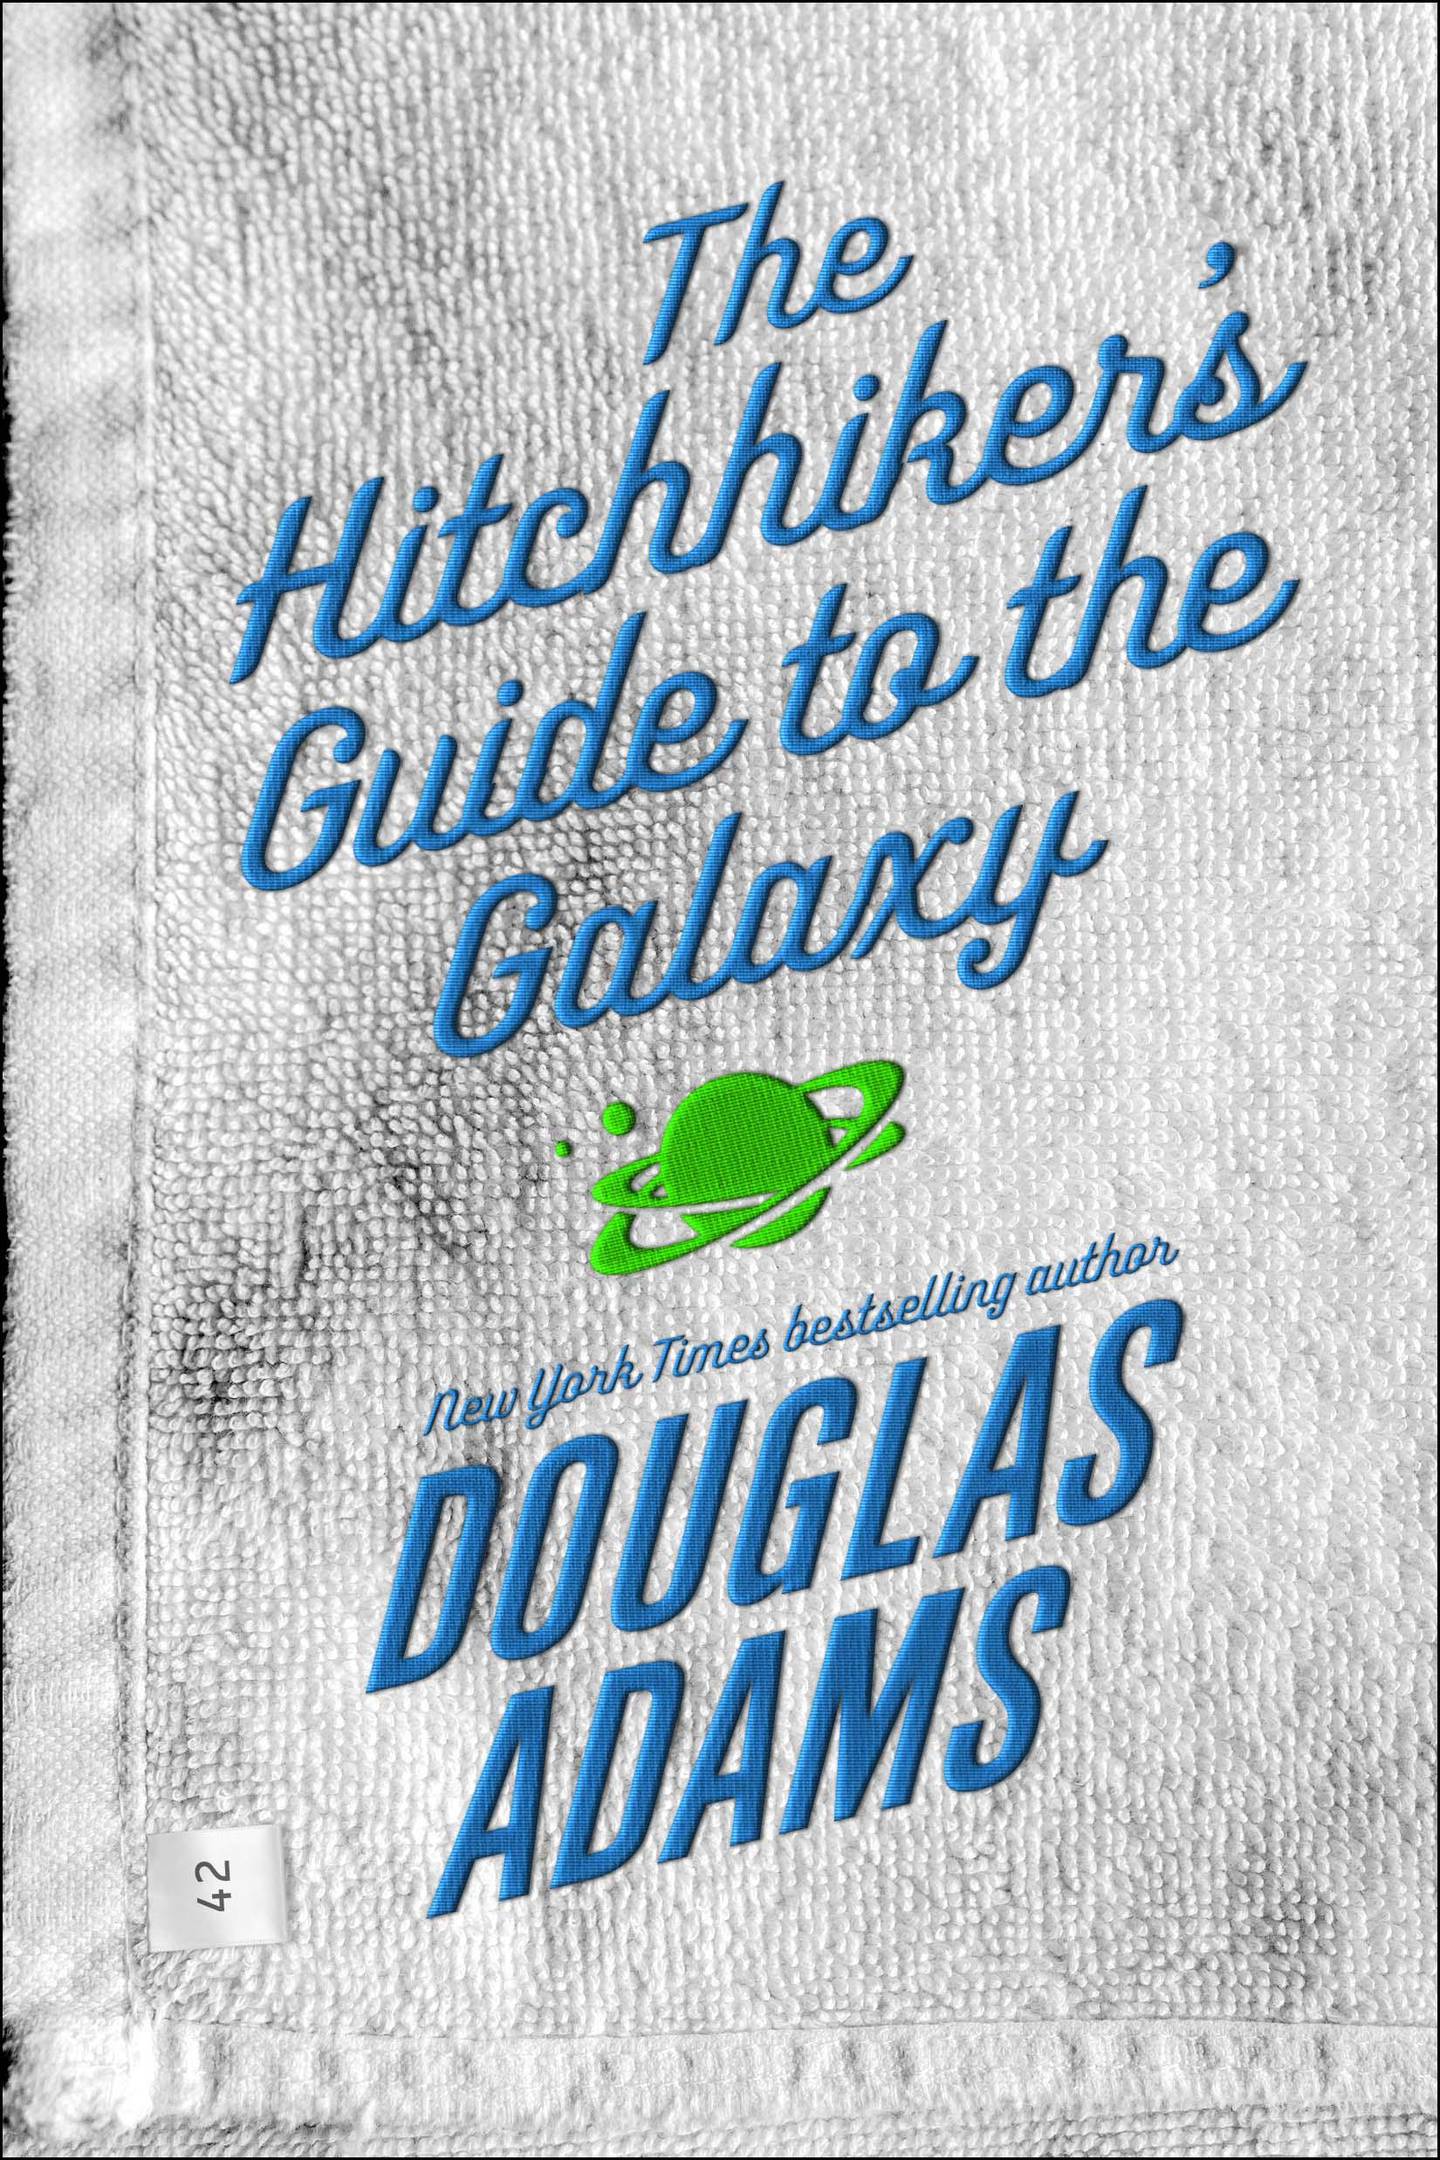 The Hitchhiker's Guide to the Galaxy by Douglas Adams published by Del Ray. Courtesy Penguin Random House